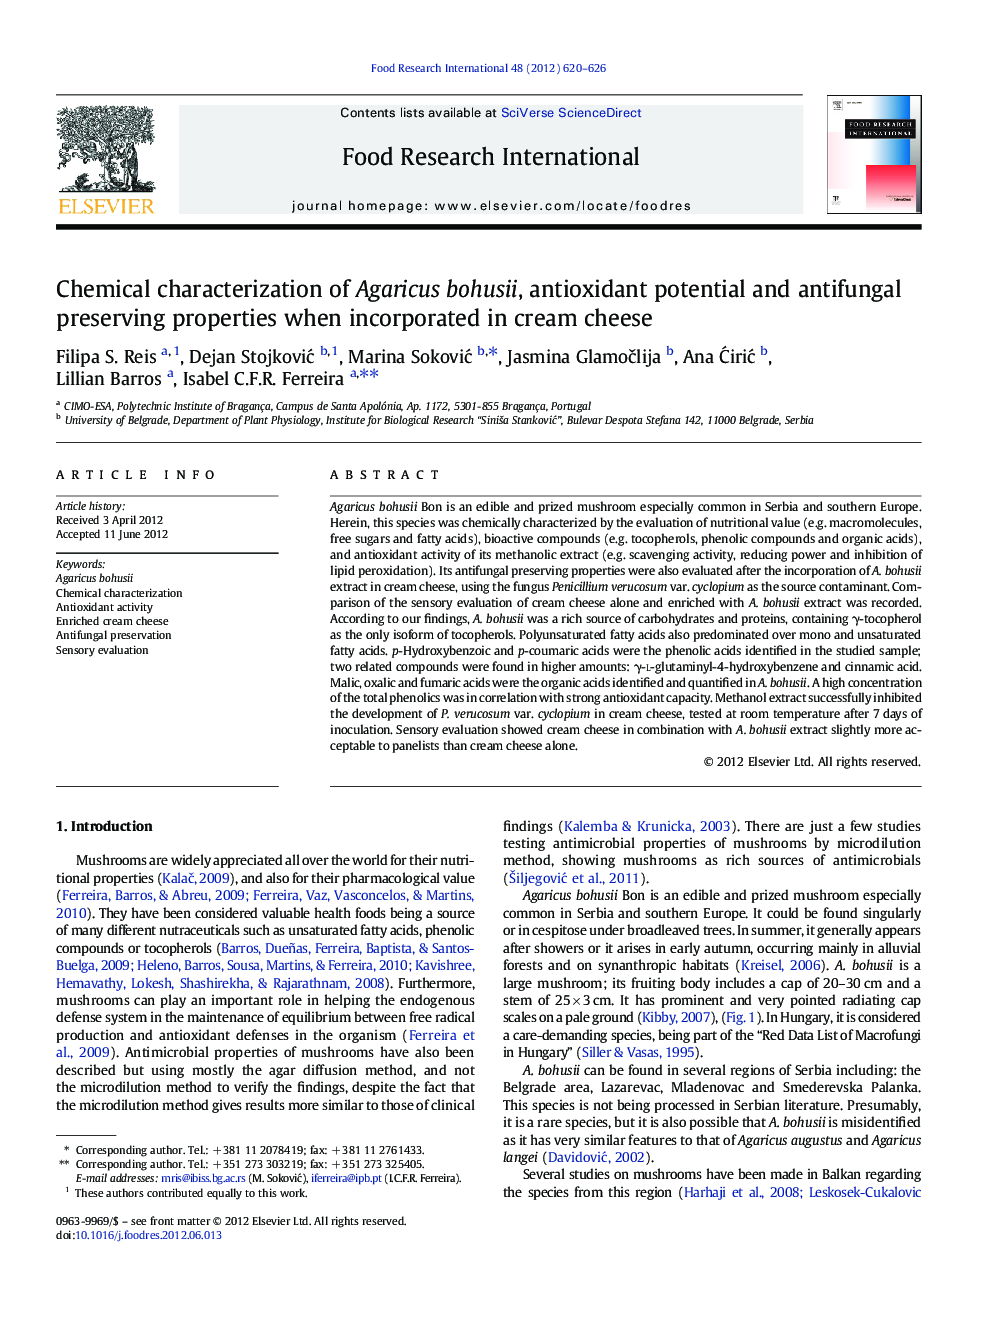 Chemical characterization of Agaricus bohusii, antioxidant potential and antifungal preserving properties when incorporated in cream cheese